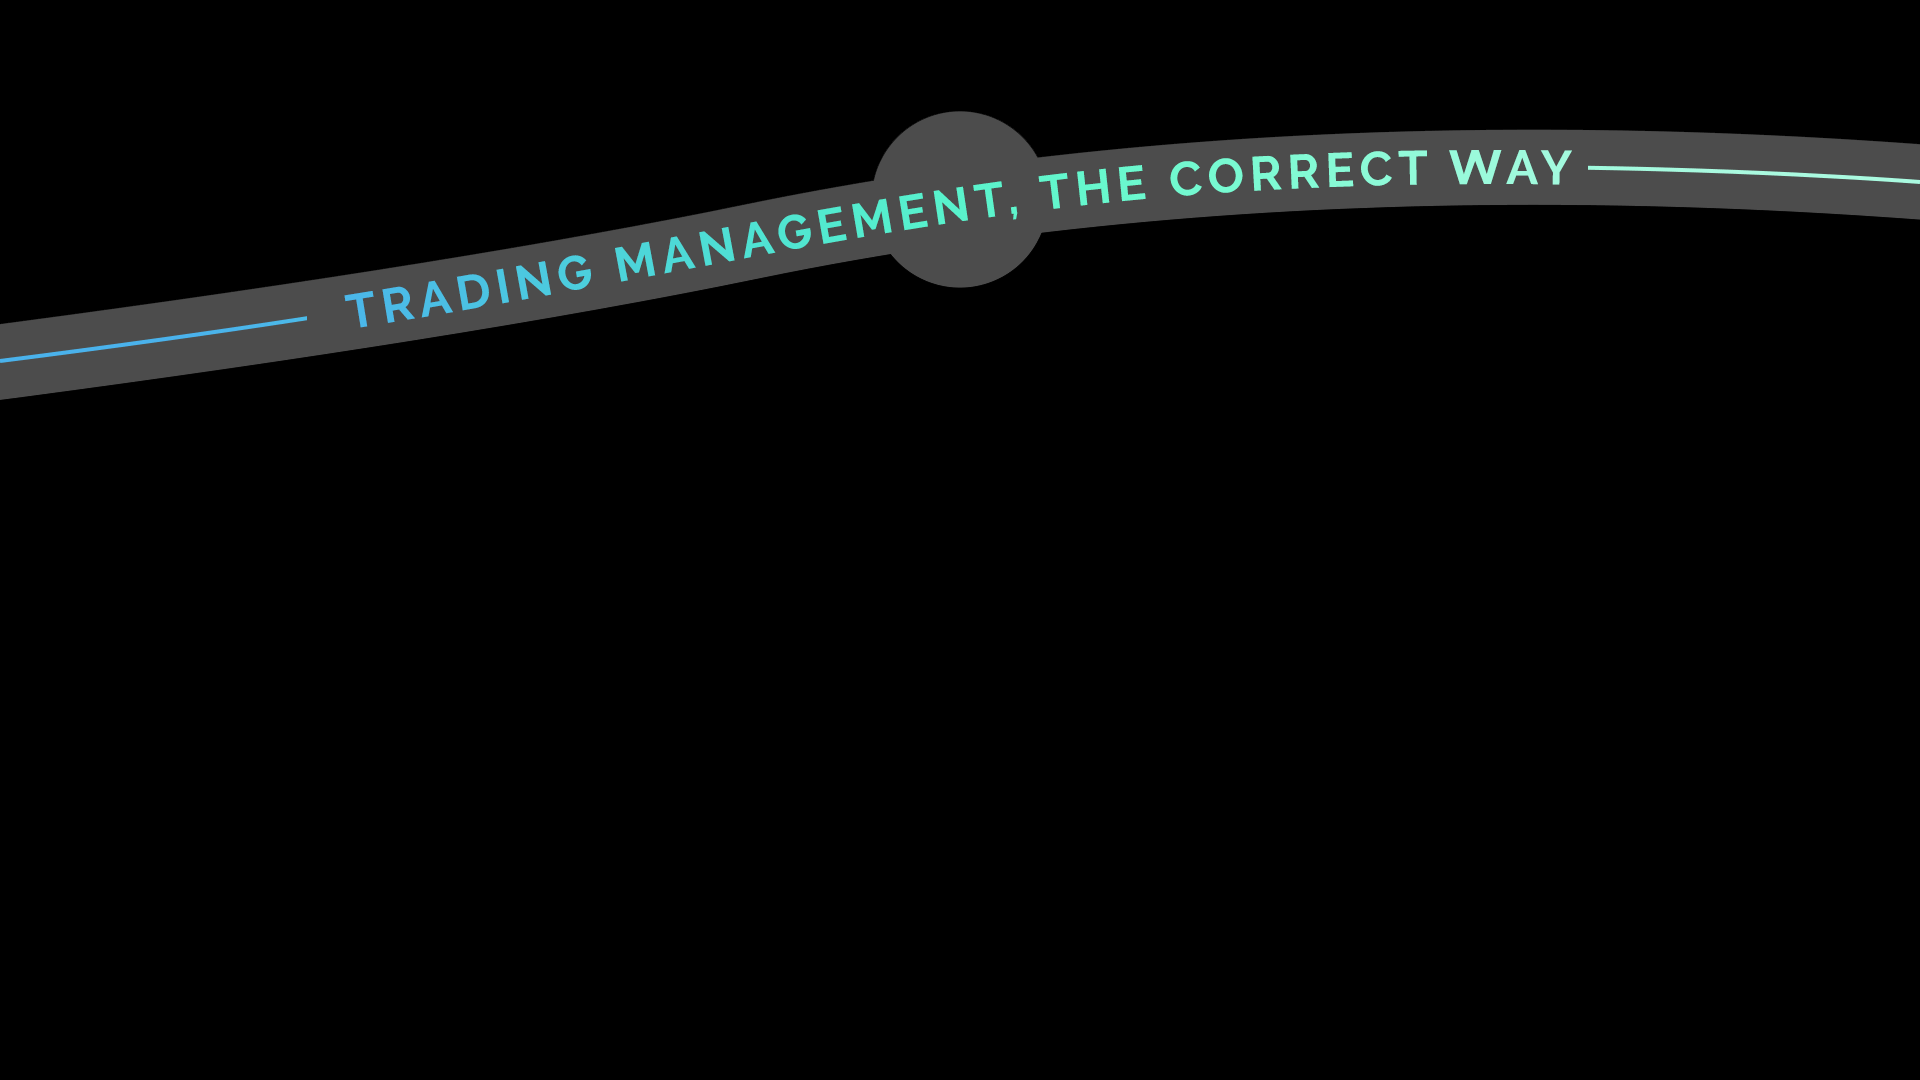 Trading management, the correct way